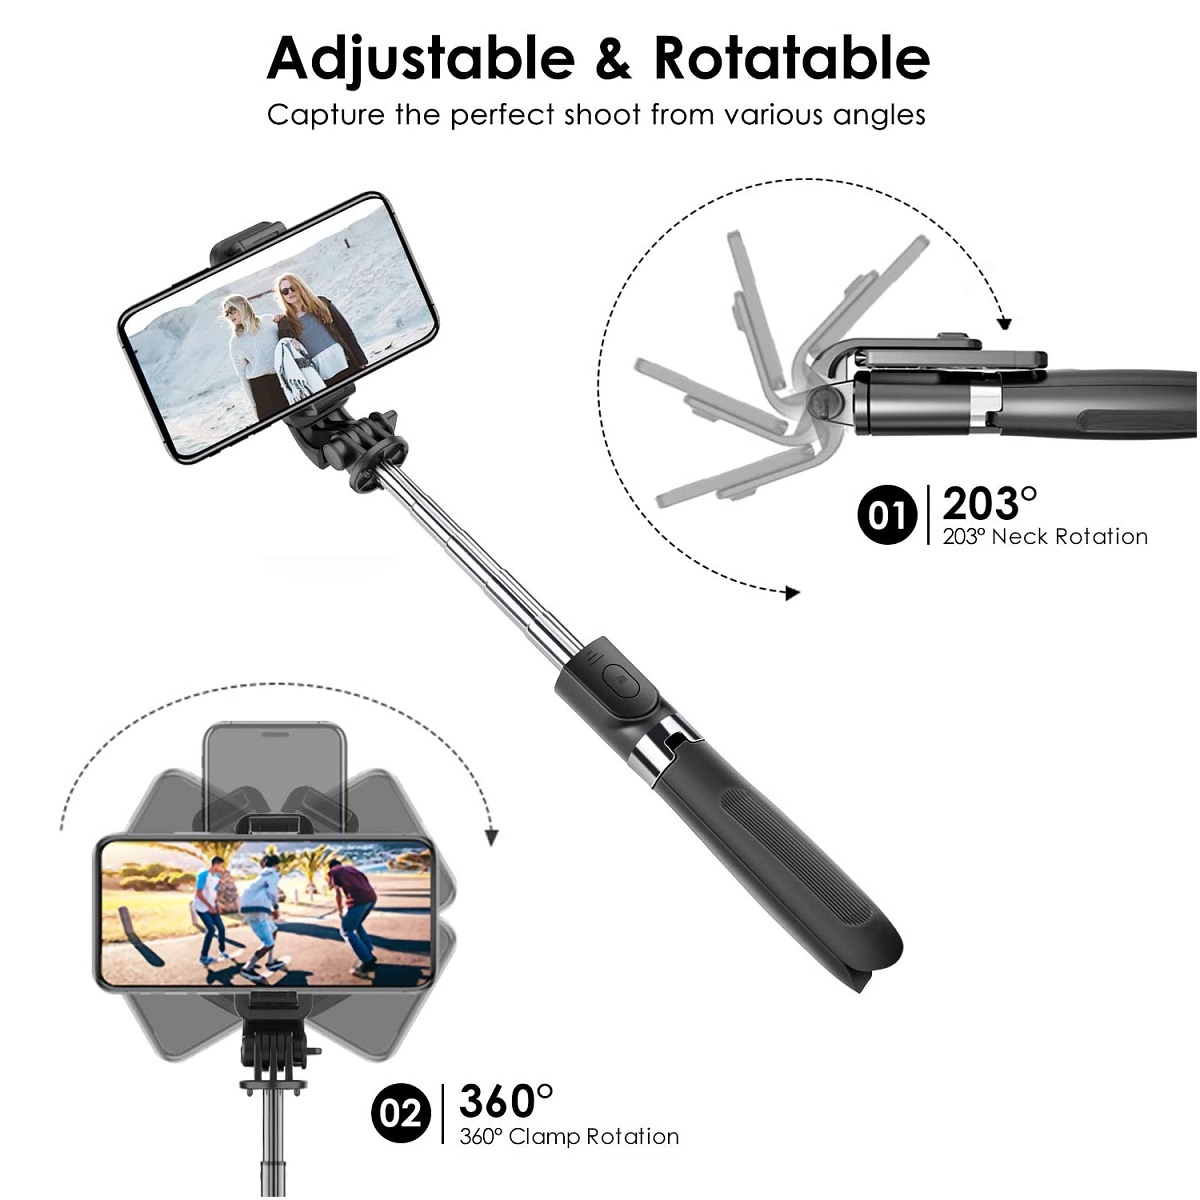 ELEGIANT bluetooth Selfie Stick Tripod Monopod 360° Rotation Adjustable Telescopic Extendable with Remote Control for Gopro Action Camera Sport DSLR Cam for iPhone Huawei Mobile Phone Smartphone